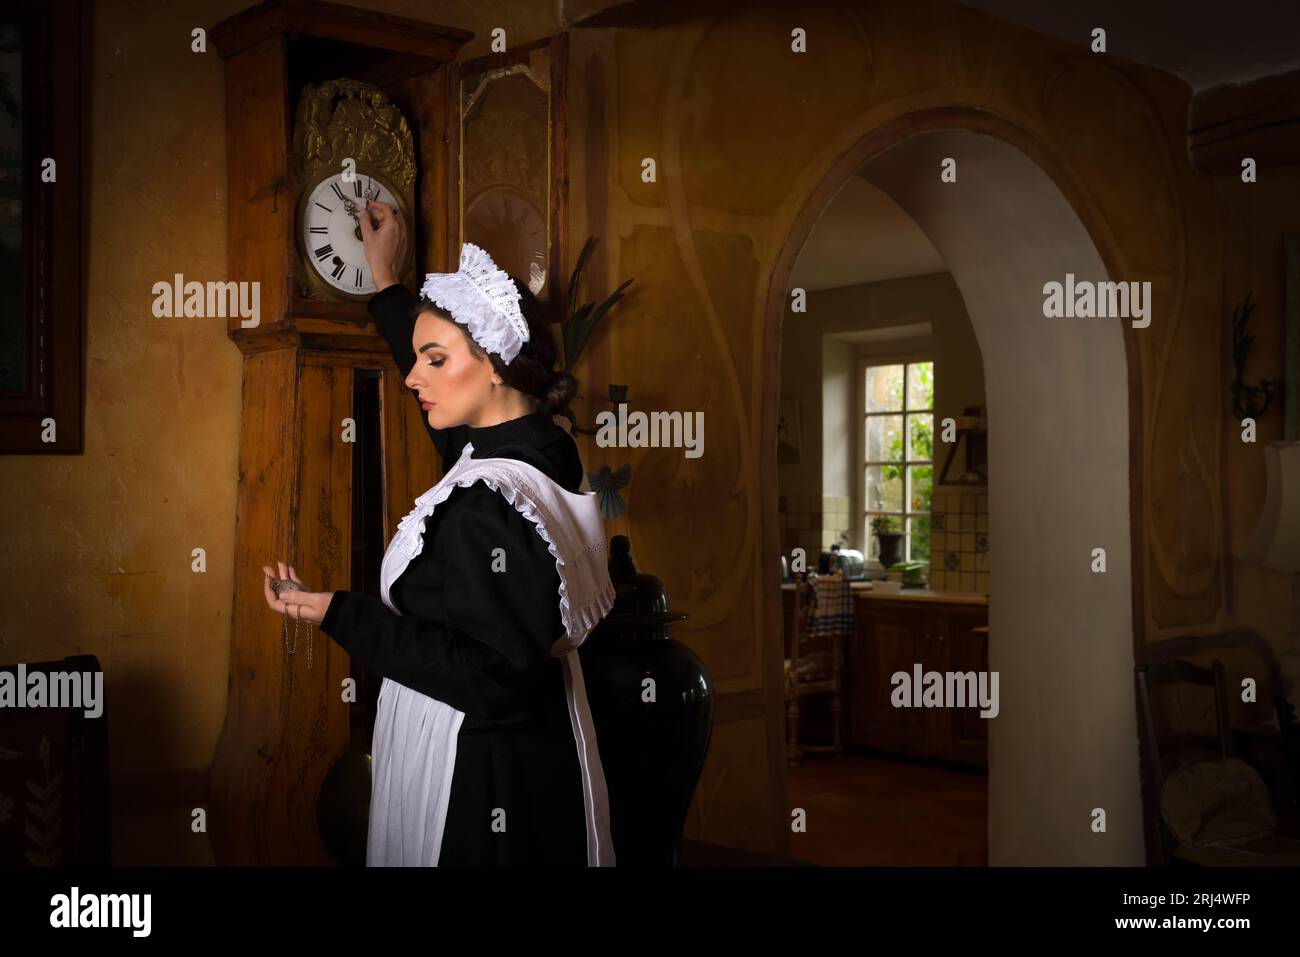 Scenes of a beautiful young Victorian maid doing house chores in an antique interior Stock Photo